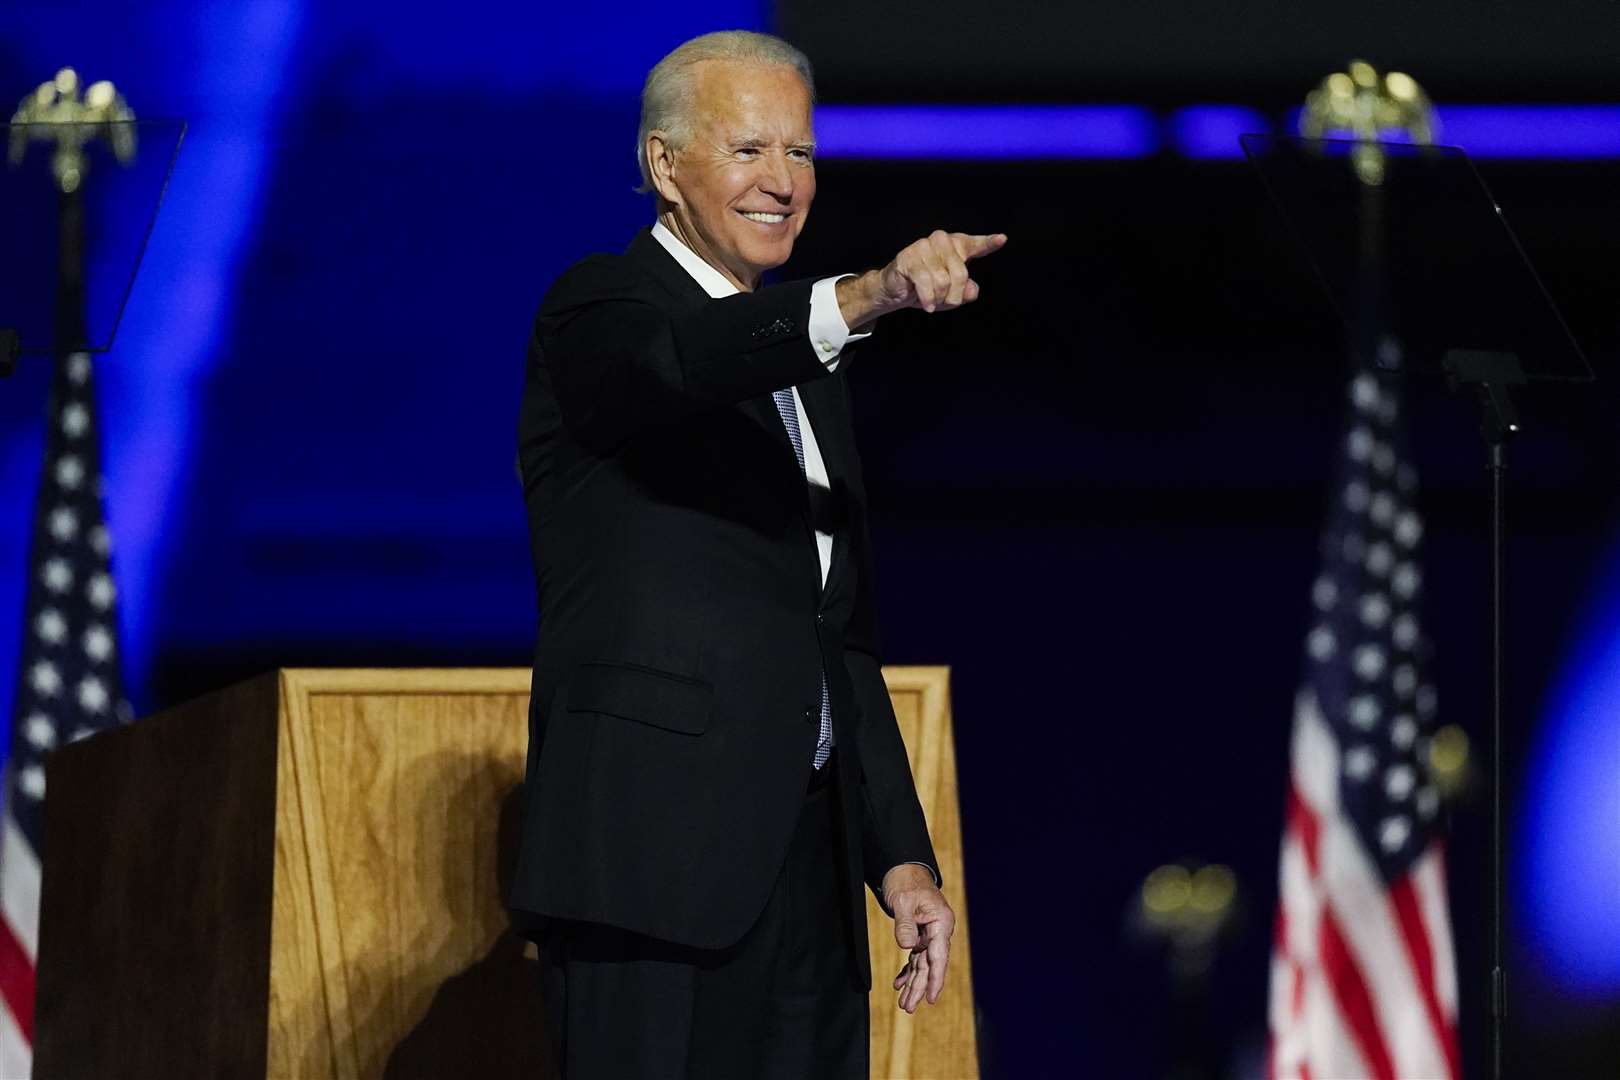 President-elect Joe Biden points to the crowd as he stands on stage after speaking (Andrew Harnik/AP)